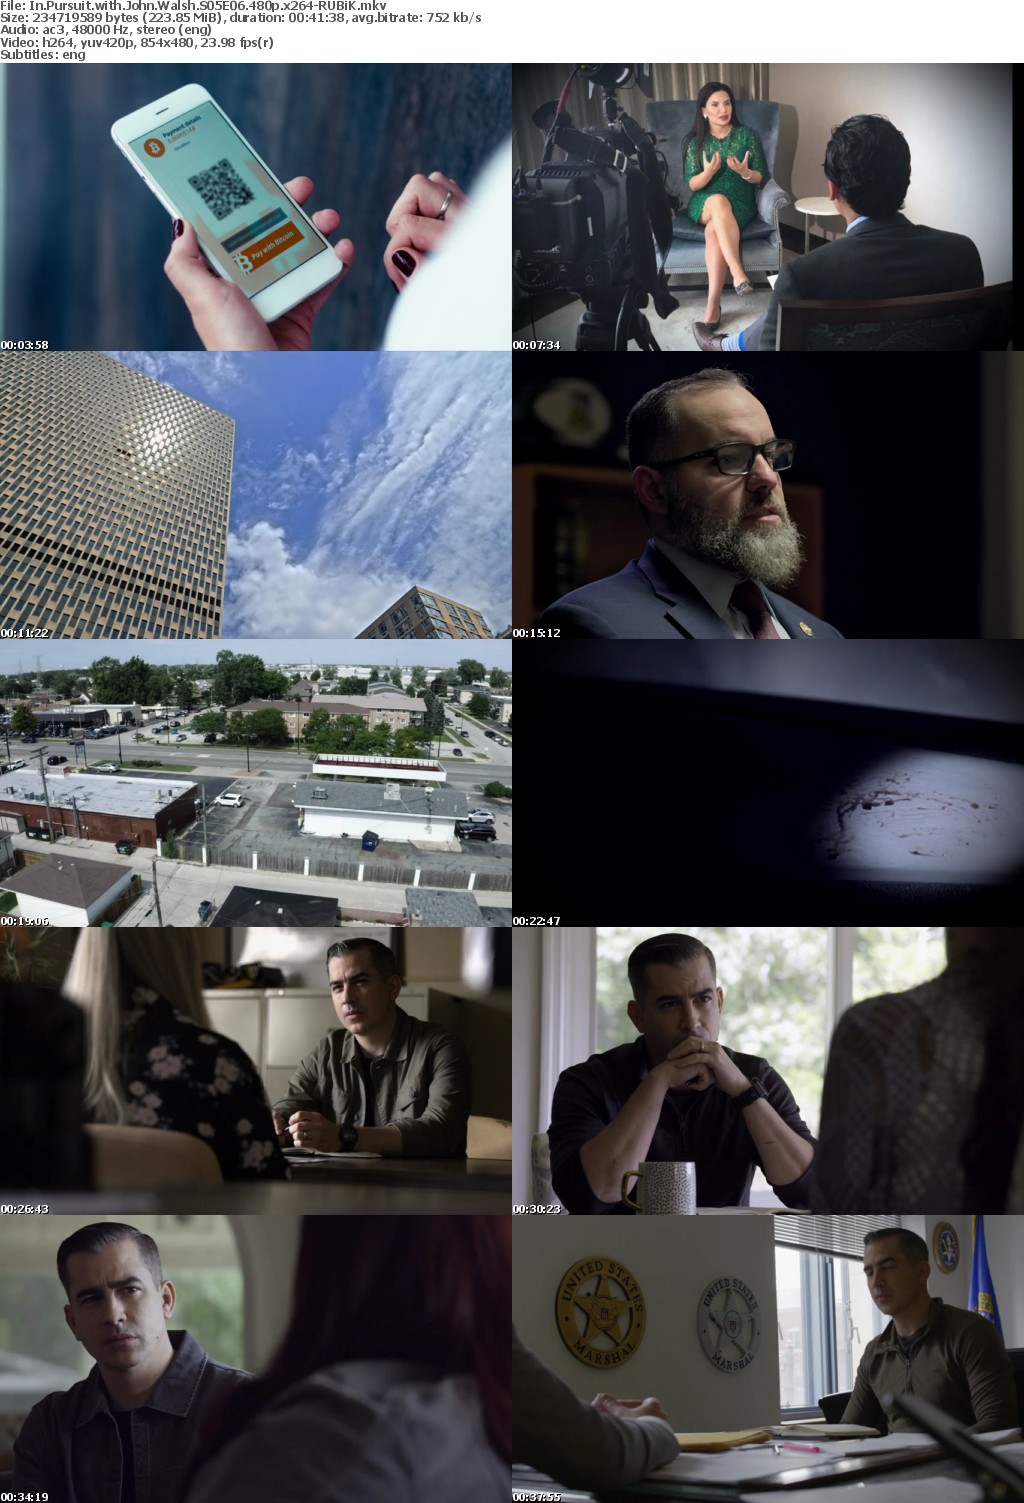 In Pursuit with John Walsh S05E06 480p x264-RUBiK Saturn5